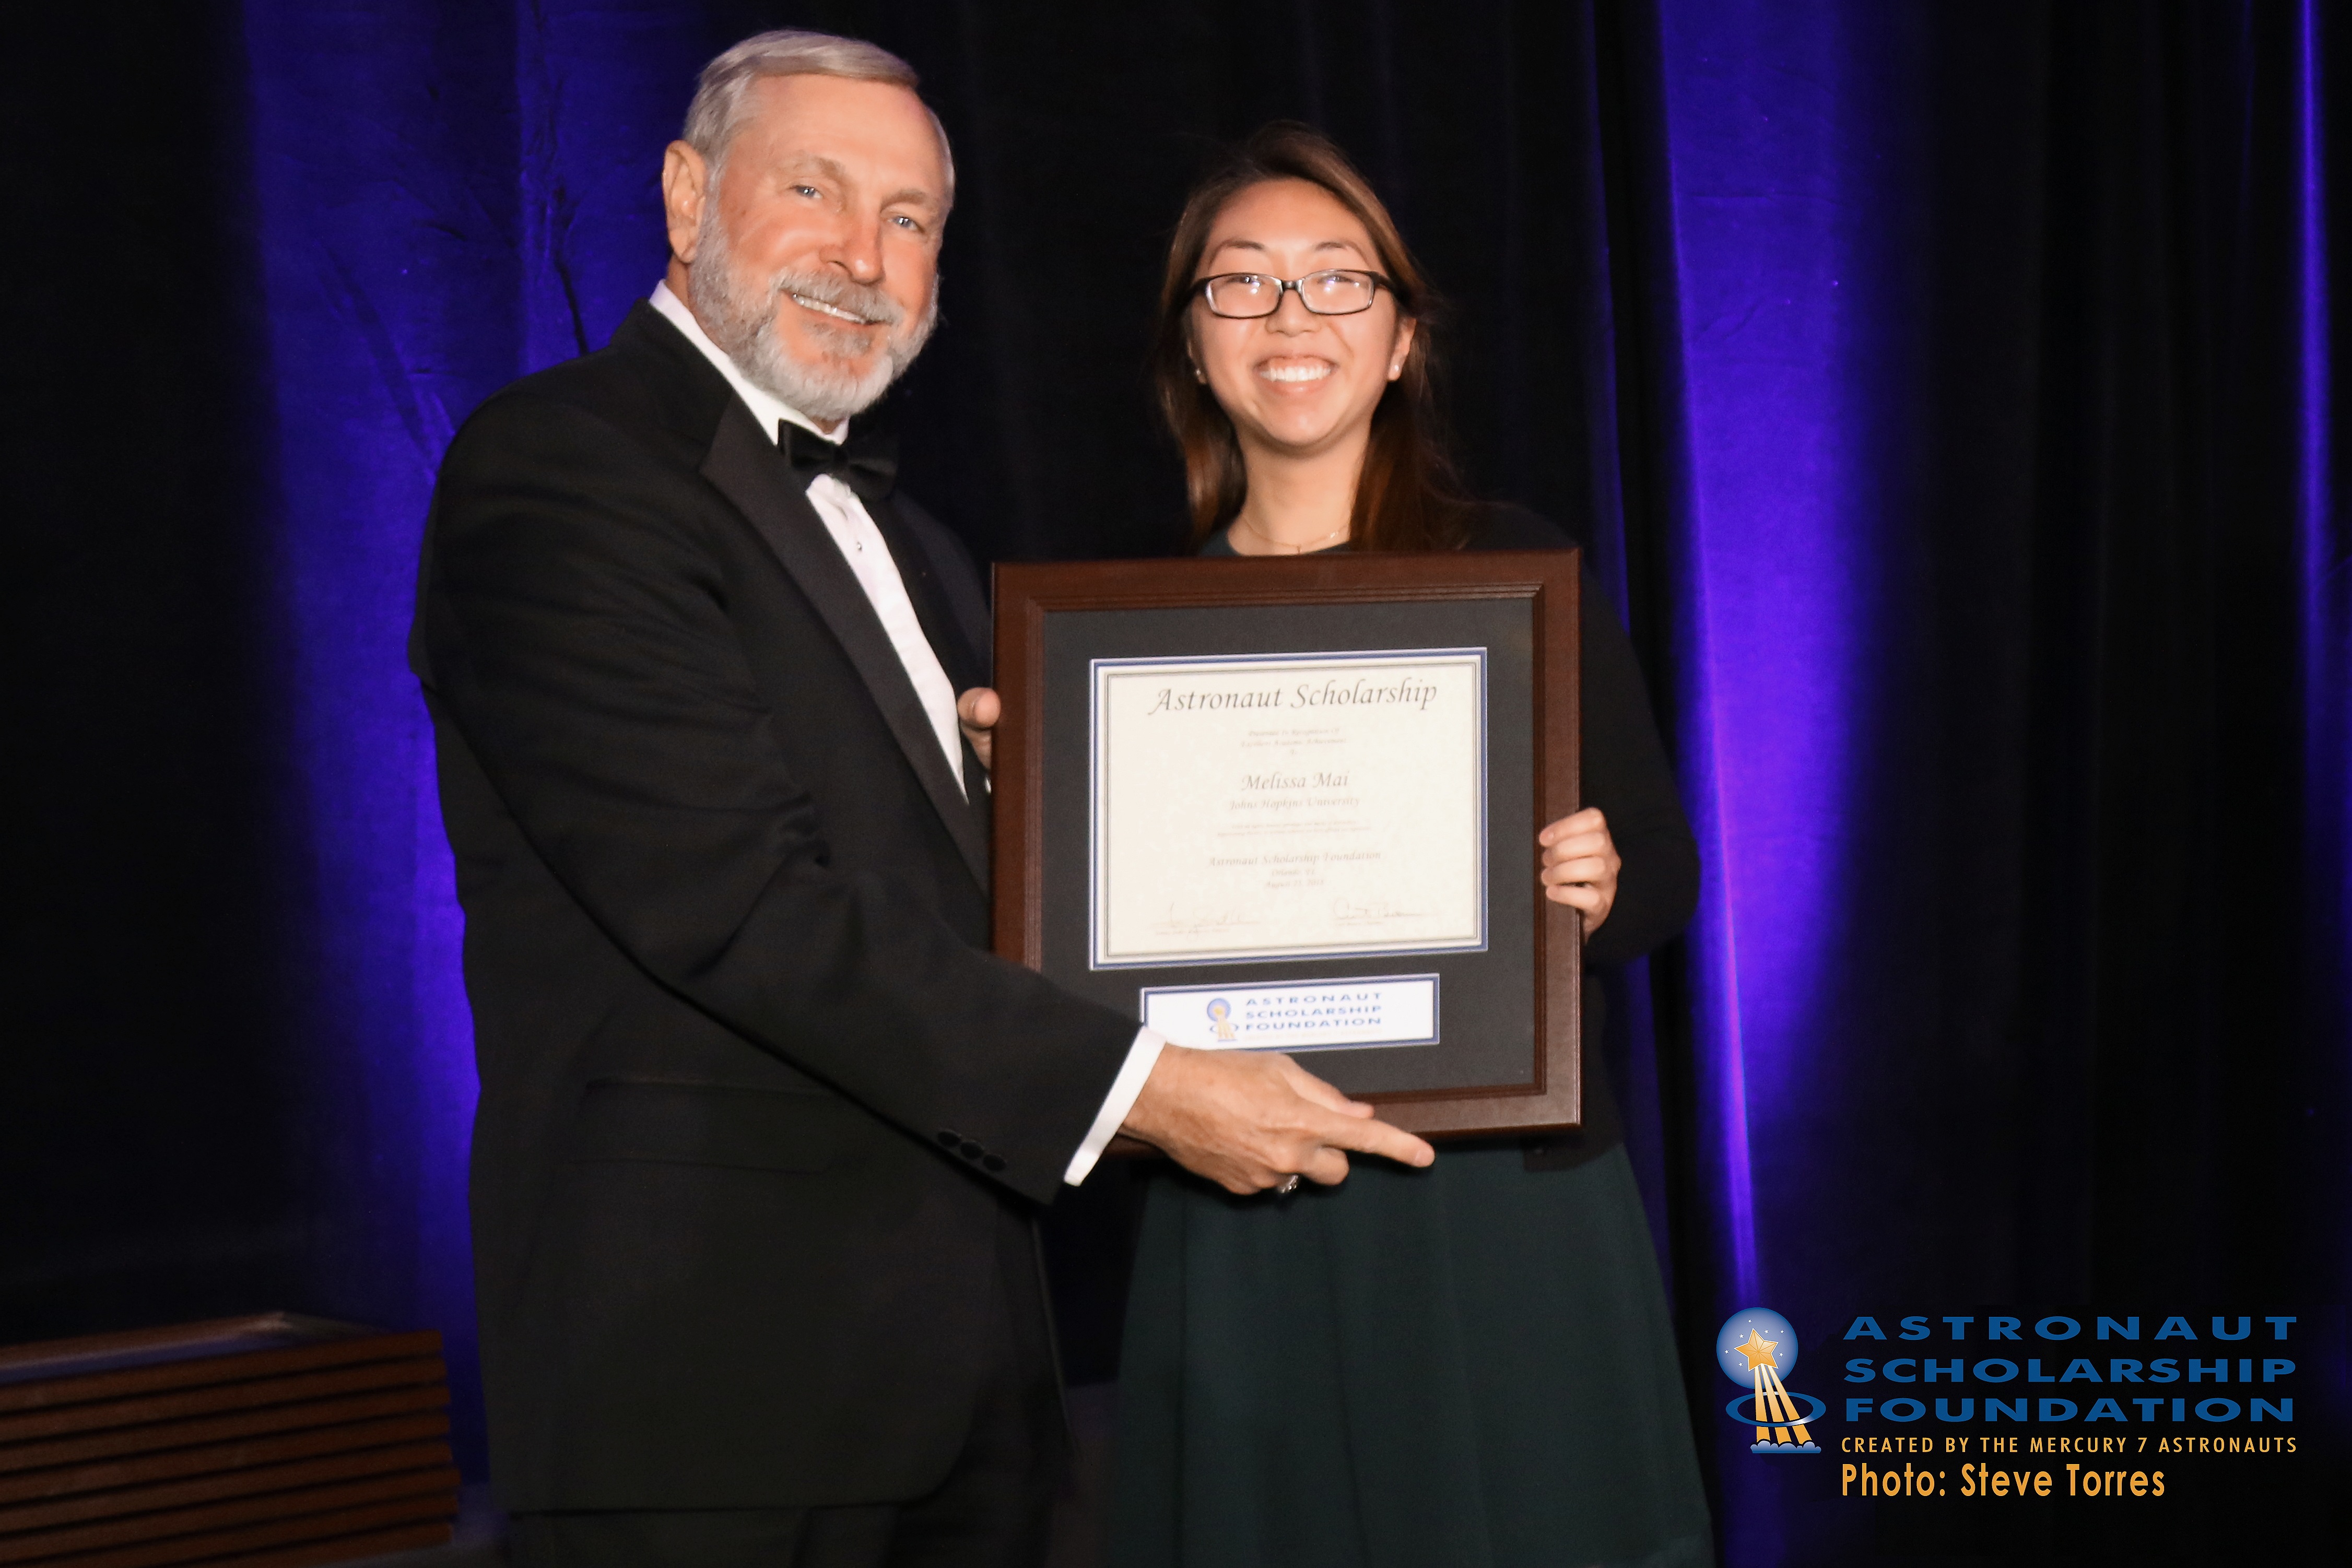 Melissa Mai receives her Astronaut Scholarship from Curt Brown at a formal event.